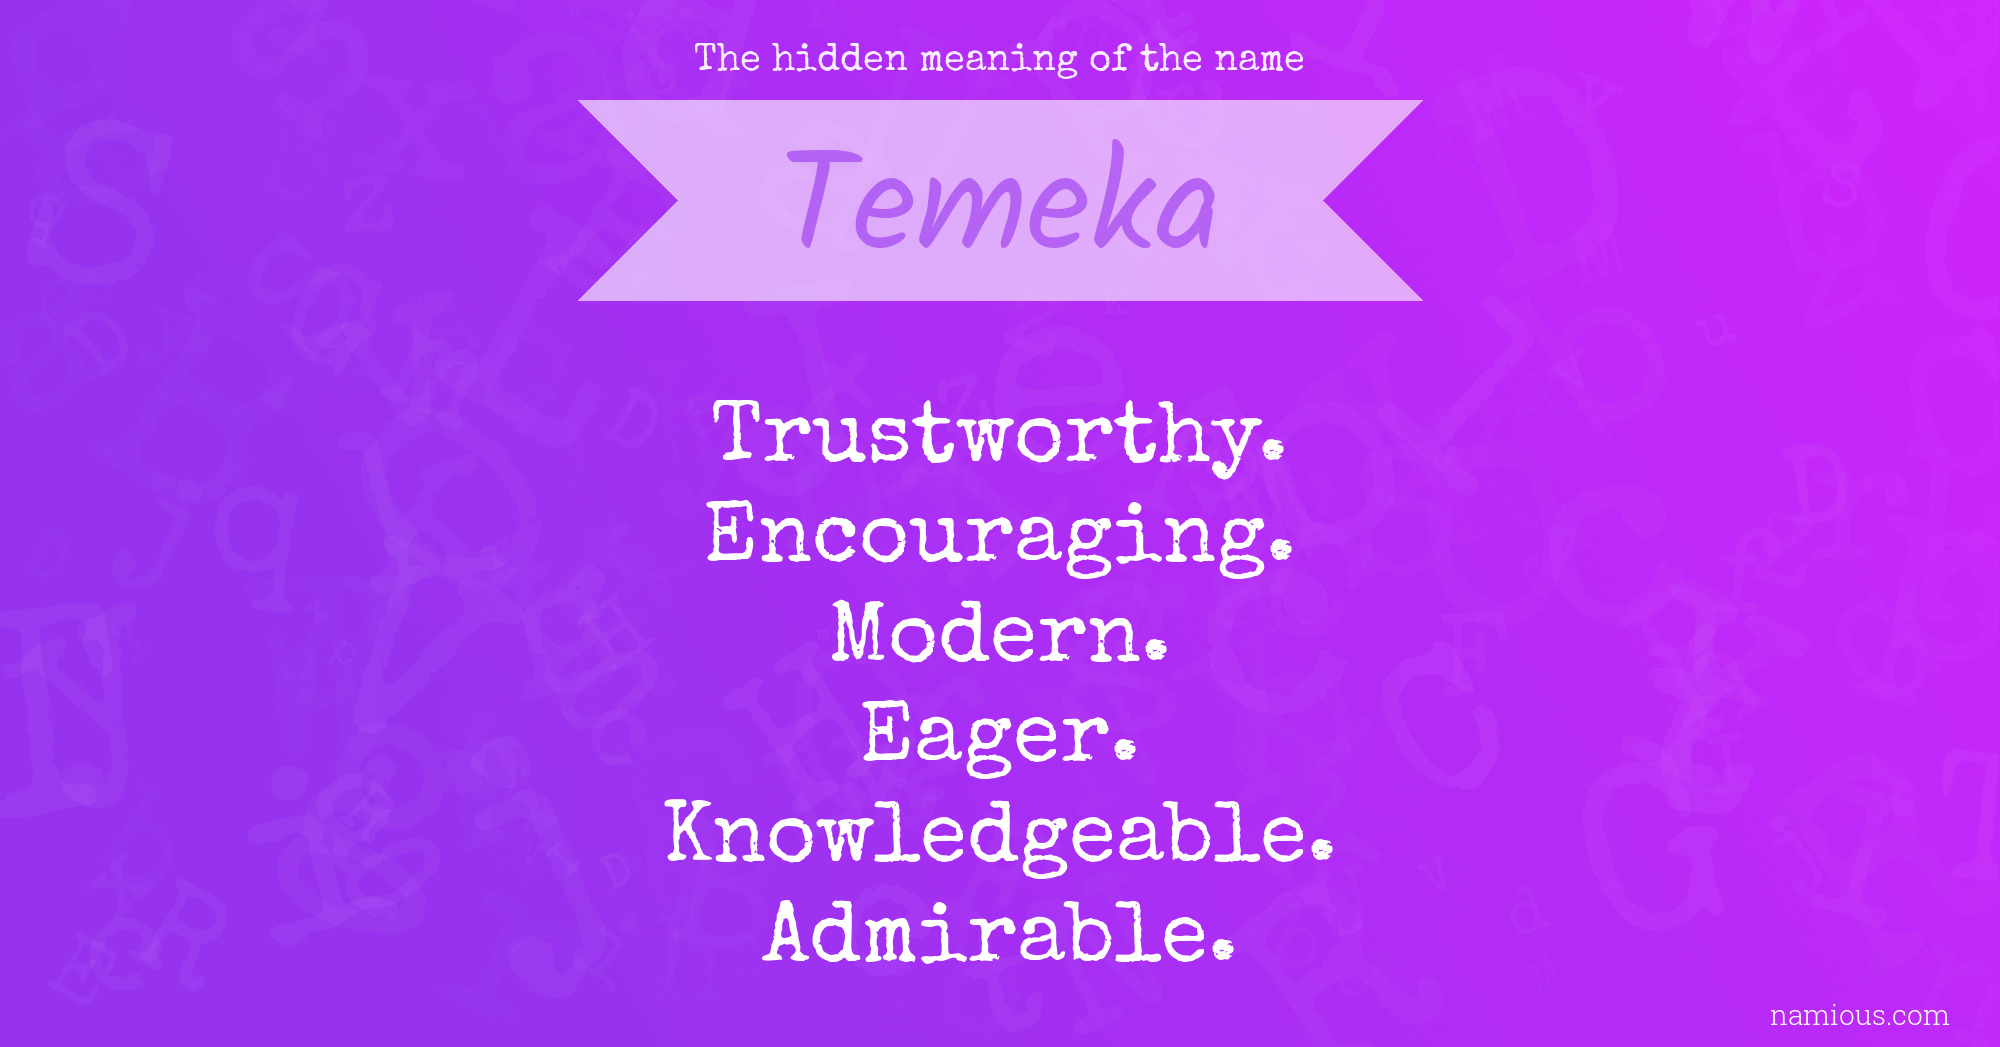 The hidden meaning of the name Temeka